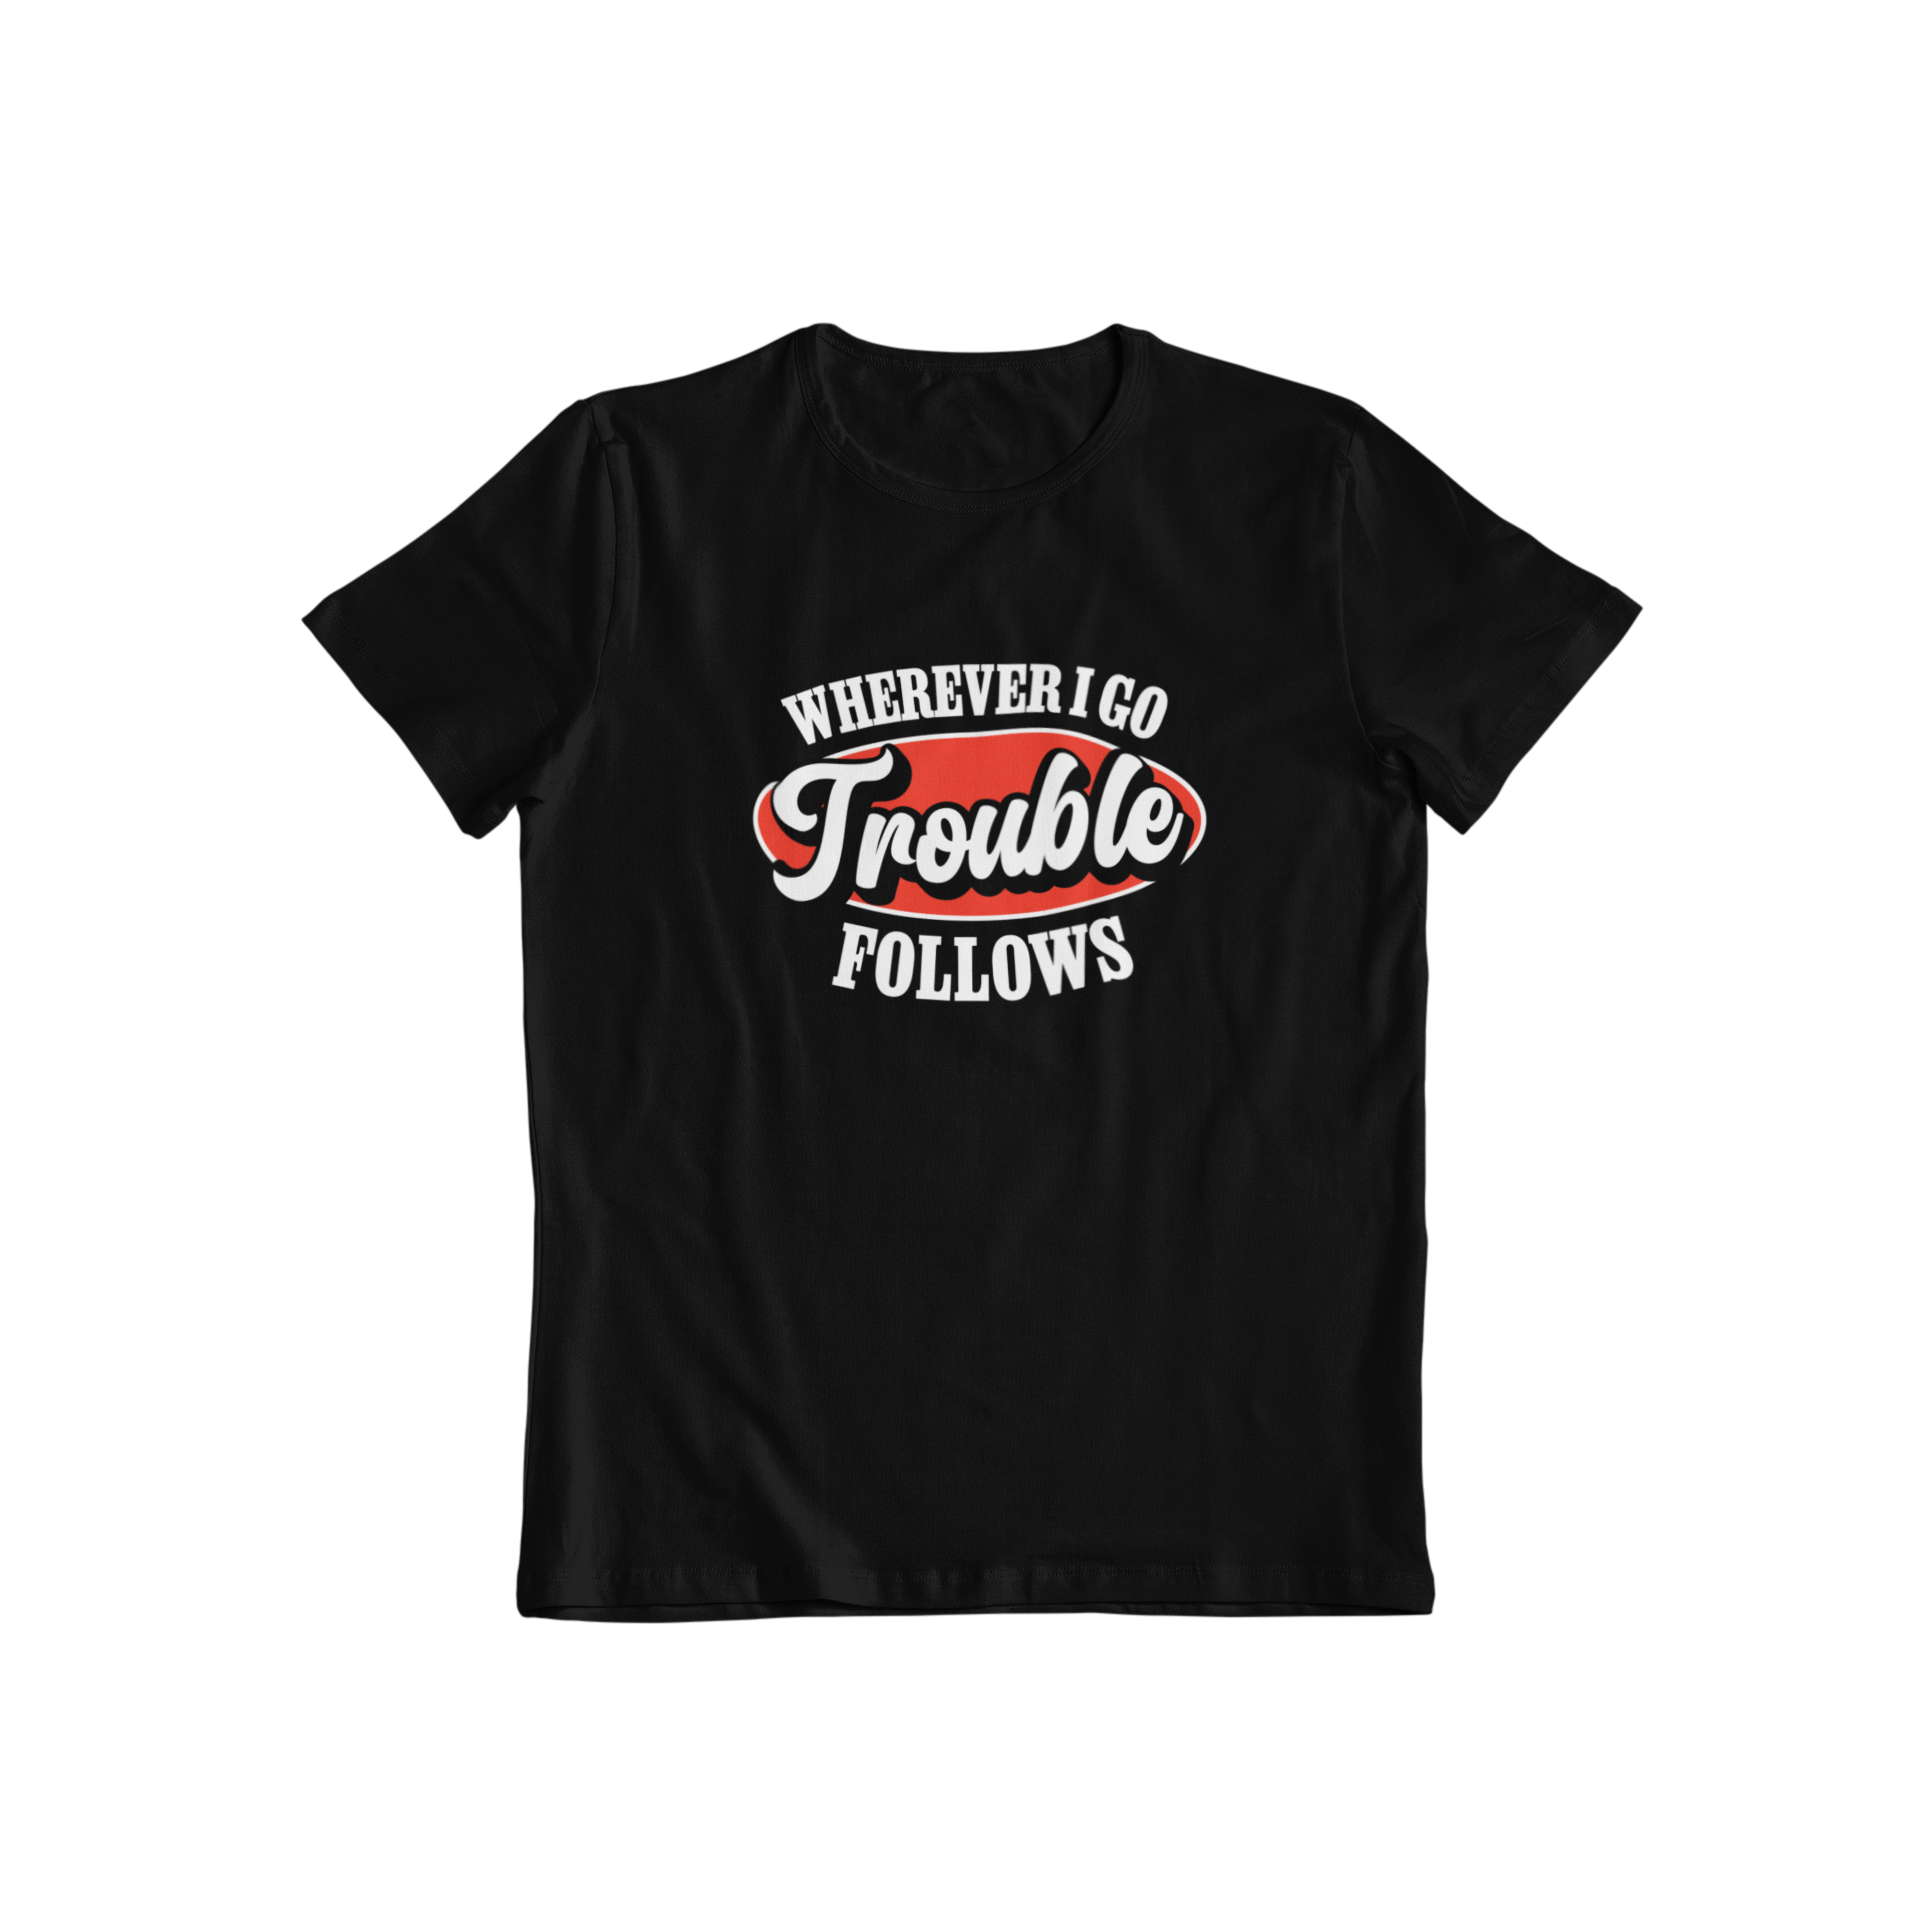 Express your bold and rebellious personality with our Trouble Follows matching slogan t-shirt. The statement 'wherever i go trouble follows' is sure to turn heads, and it perfectly complements our 'i'm trouble' t-shirt. Show off your fearless attitude with this dynamic duo.